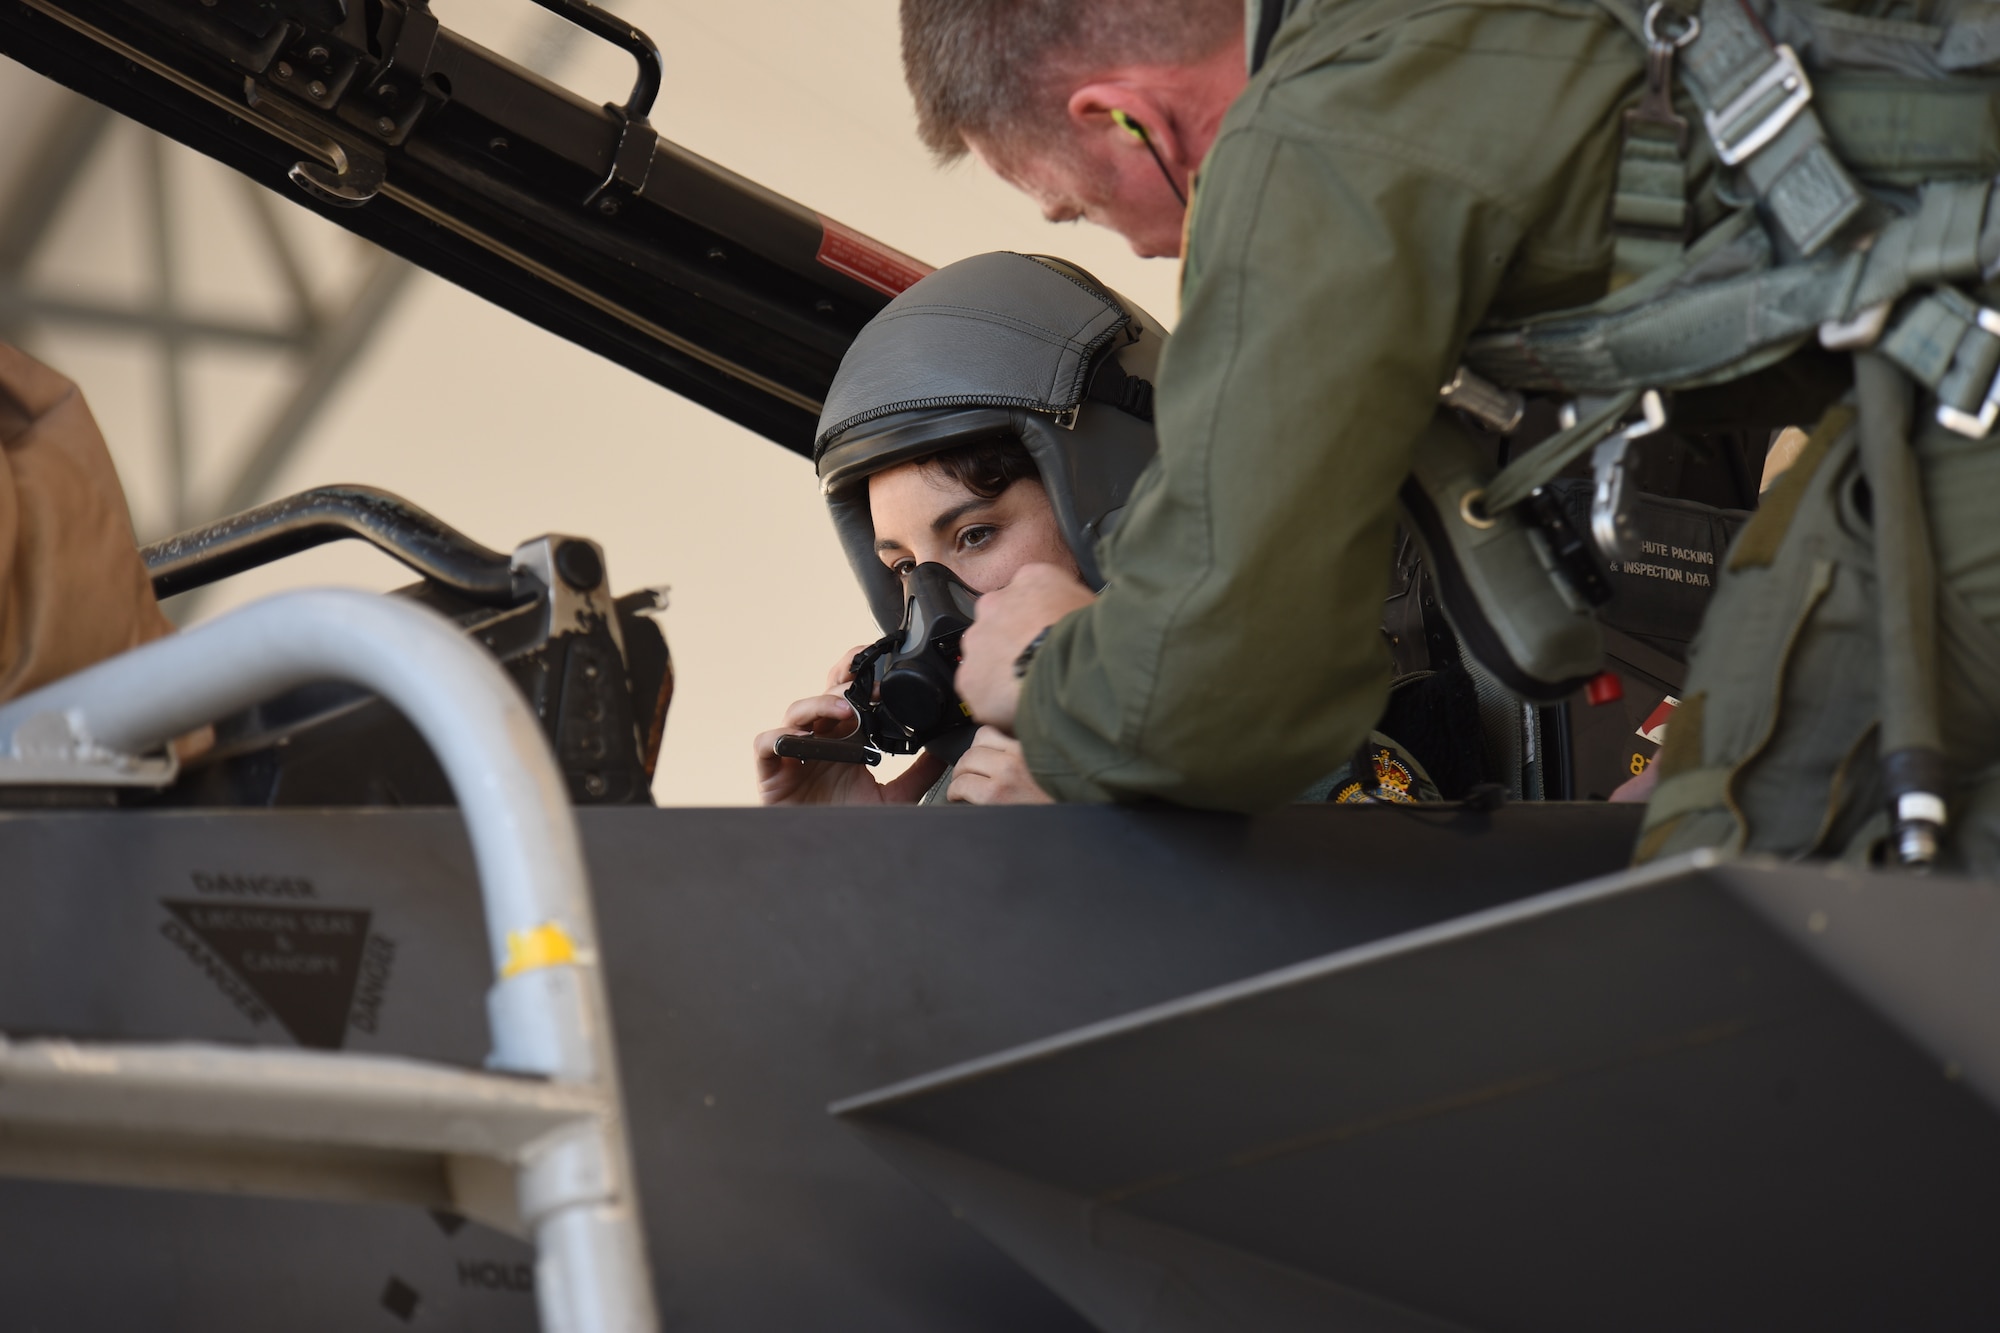 Lt. Col. Jason Taylor, 334th Fighter Squadron commander, prepares singer song-writer Danika Portz for an incentive in an F-15E Strike Eagle, May 17, 2017, at Seymour Johnson Air Force Base, North Carolina. This year’s Wings Over Wayne Air Show features 21 ground and aerial acts and an opening performance by Portz who will sing the National Anthem. (U.S. Air Force photo by Airman 1st Class Miranda A. Loera)